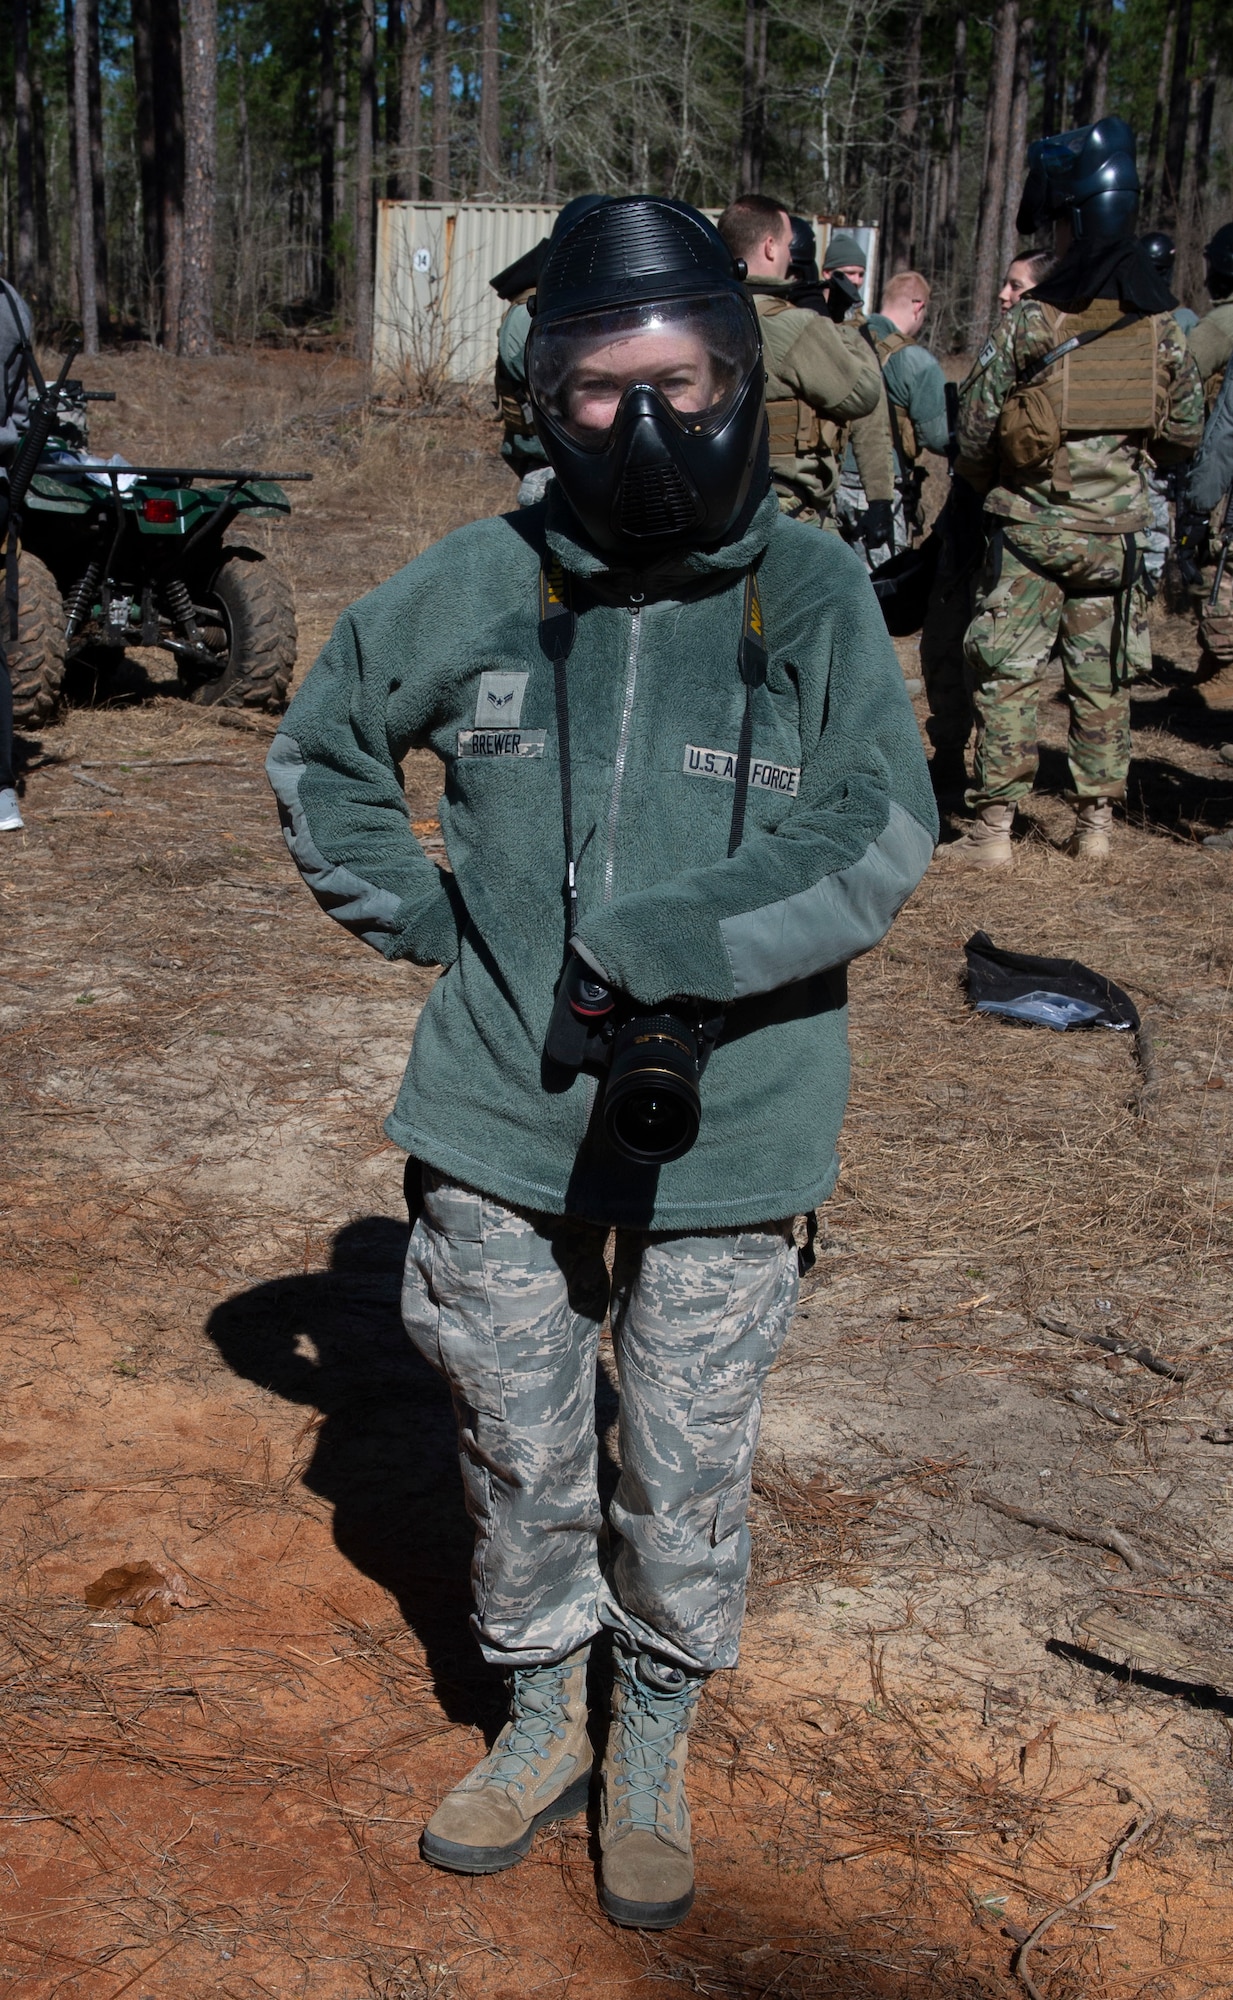 U.S. Air Force Airman 1st Class Kaitlyn Brewer stands with a gas mask for 20th Security Forces Squadron training in Sumter, S.C., March 6, 2019.